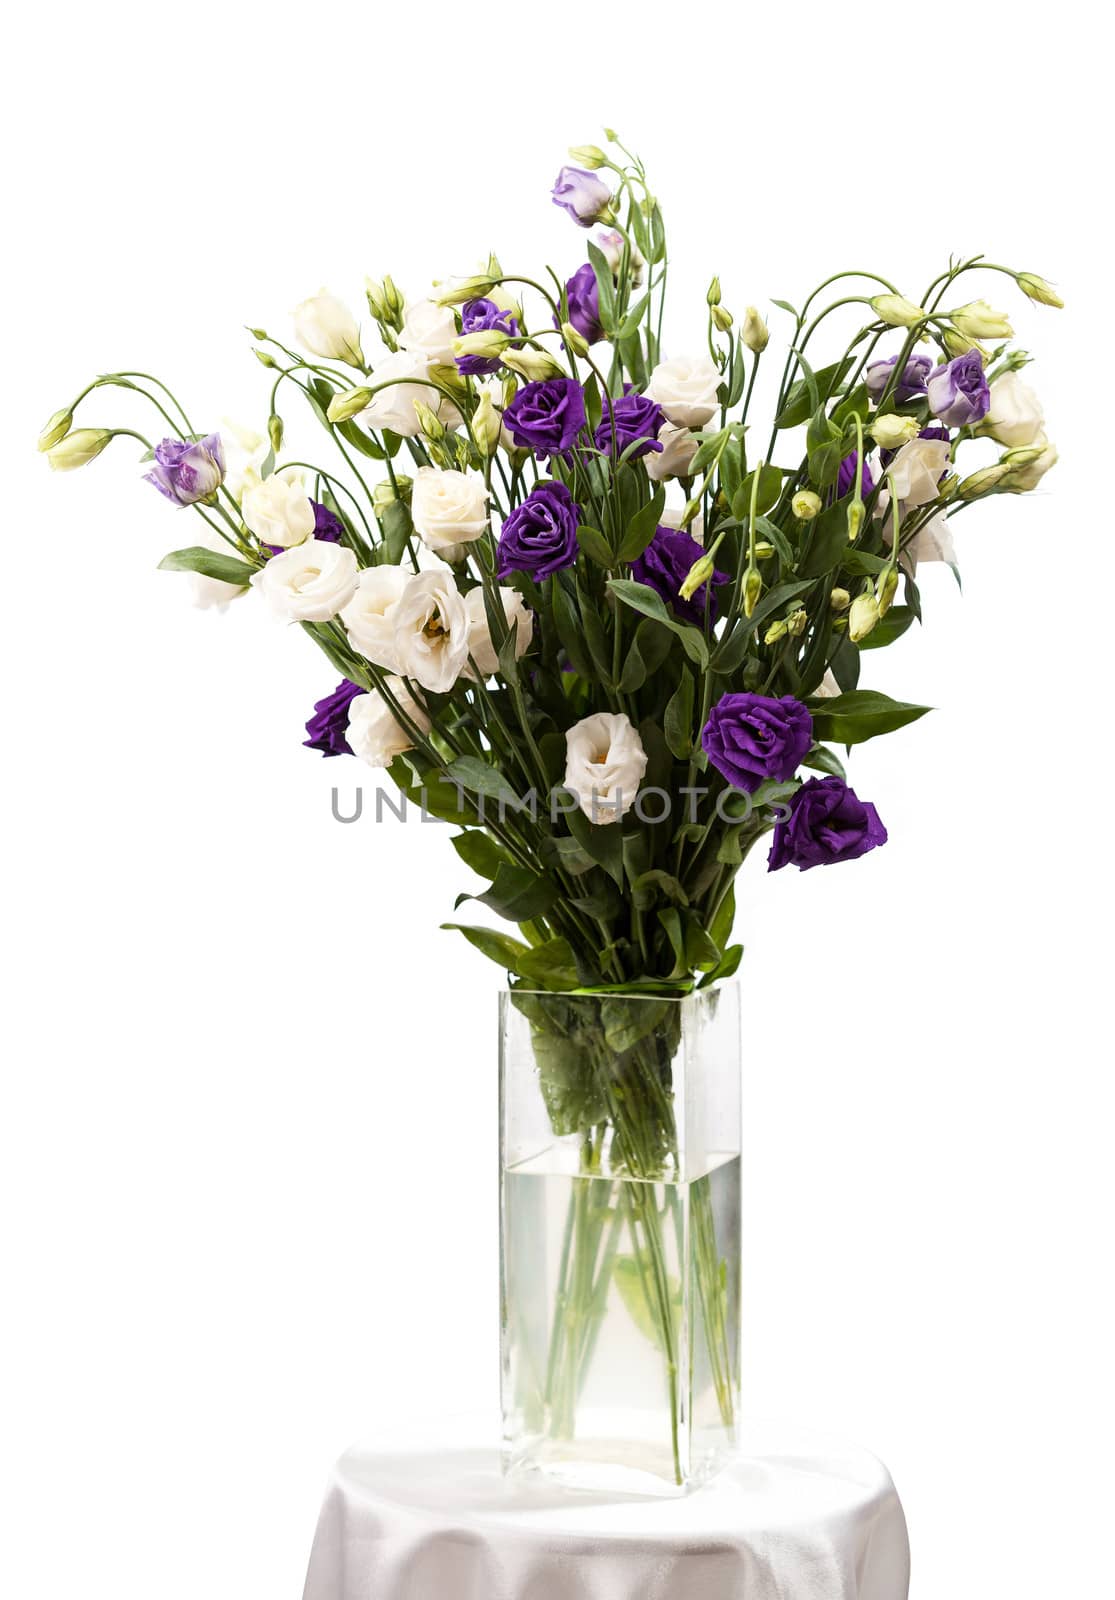 Bouquet of eustoma flowers in vases, isolated on white